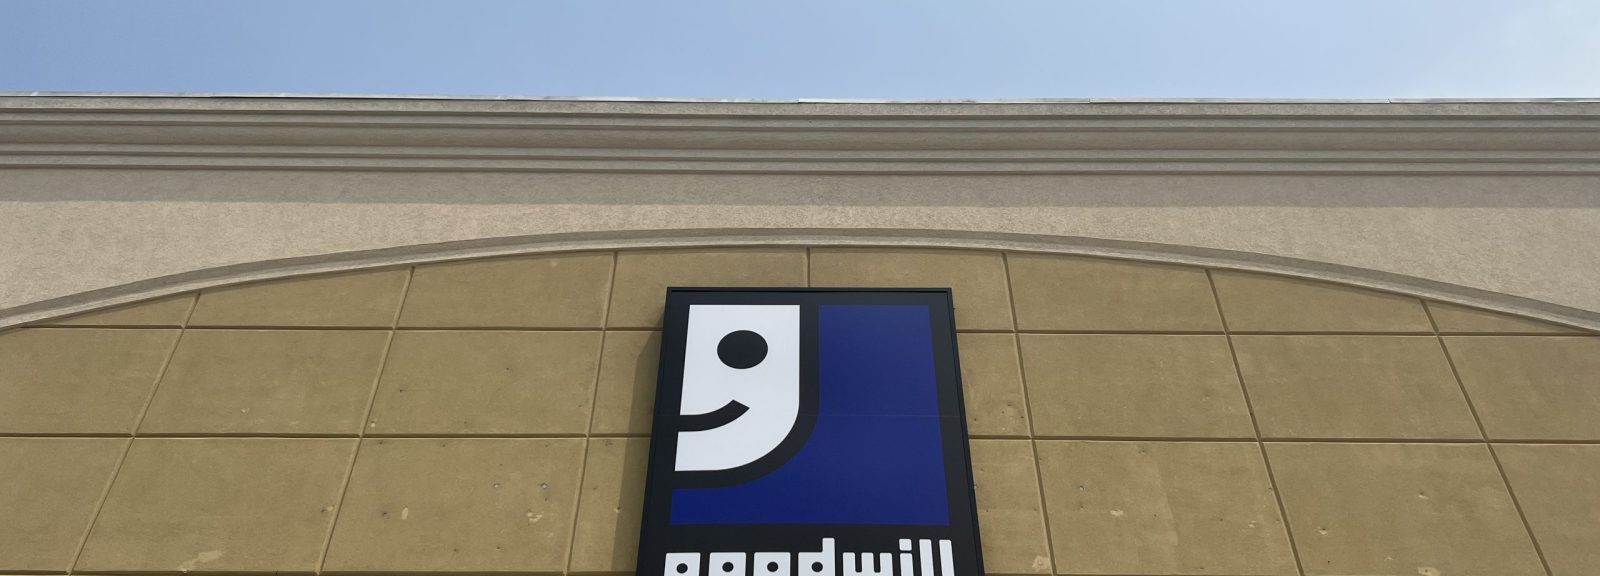 Mount Pleasant Goodwill Store Exterior